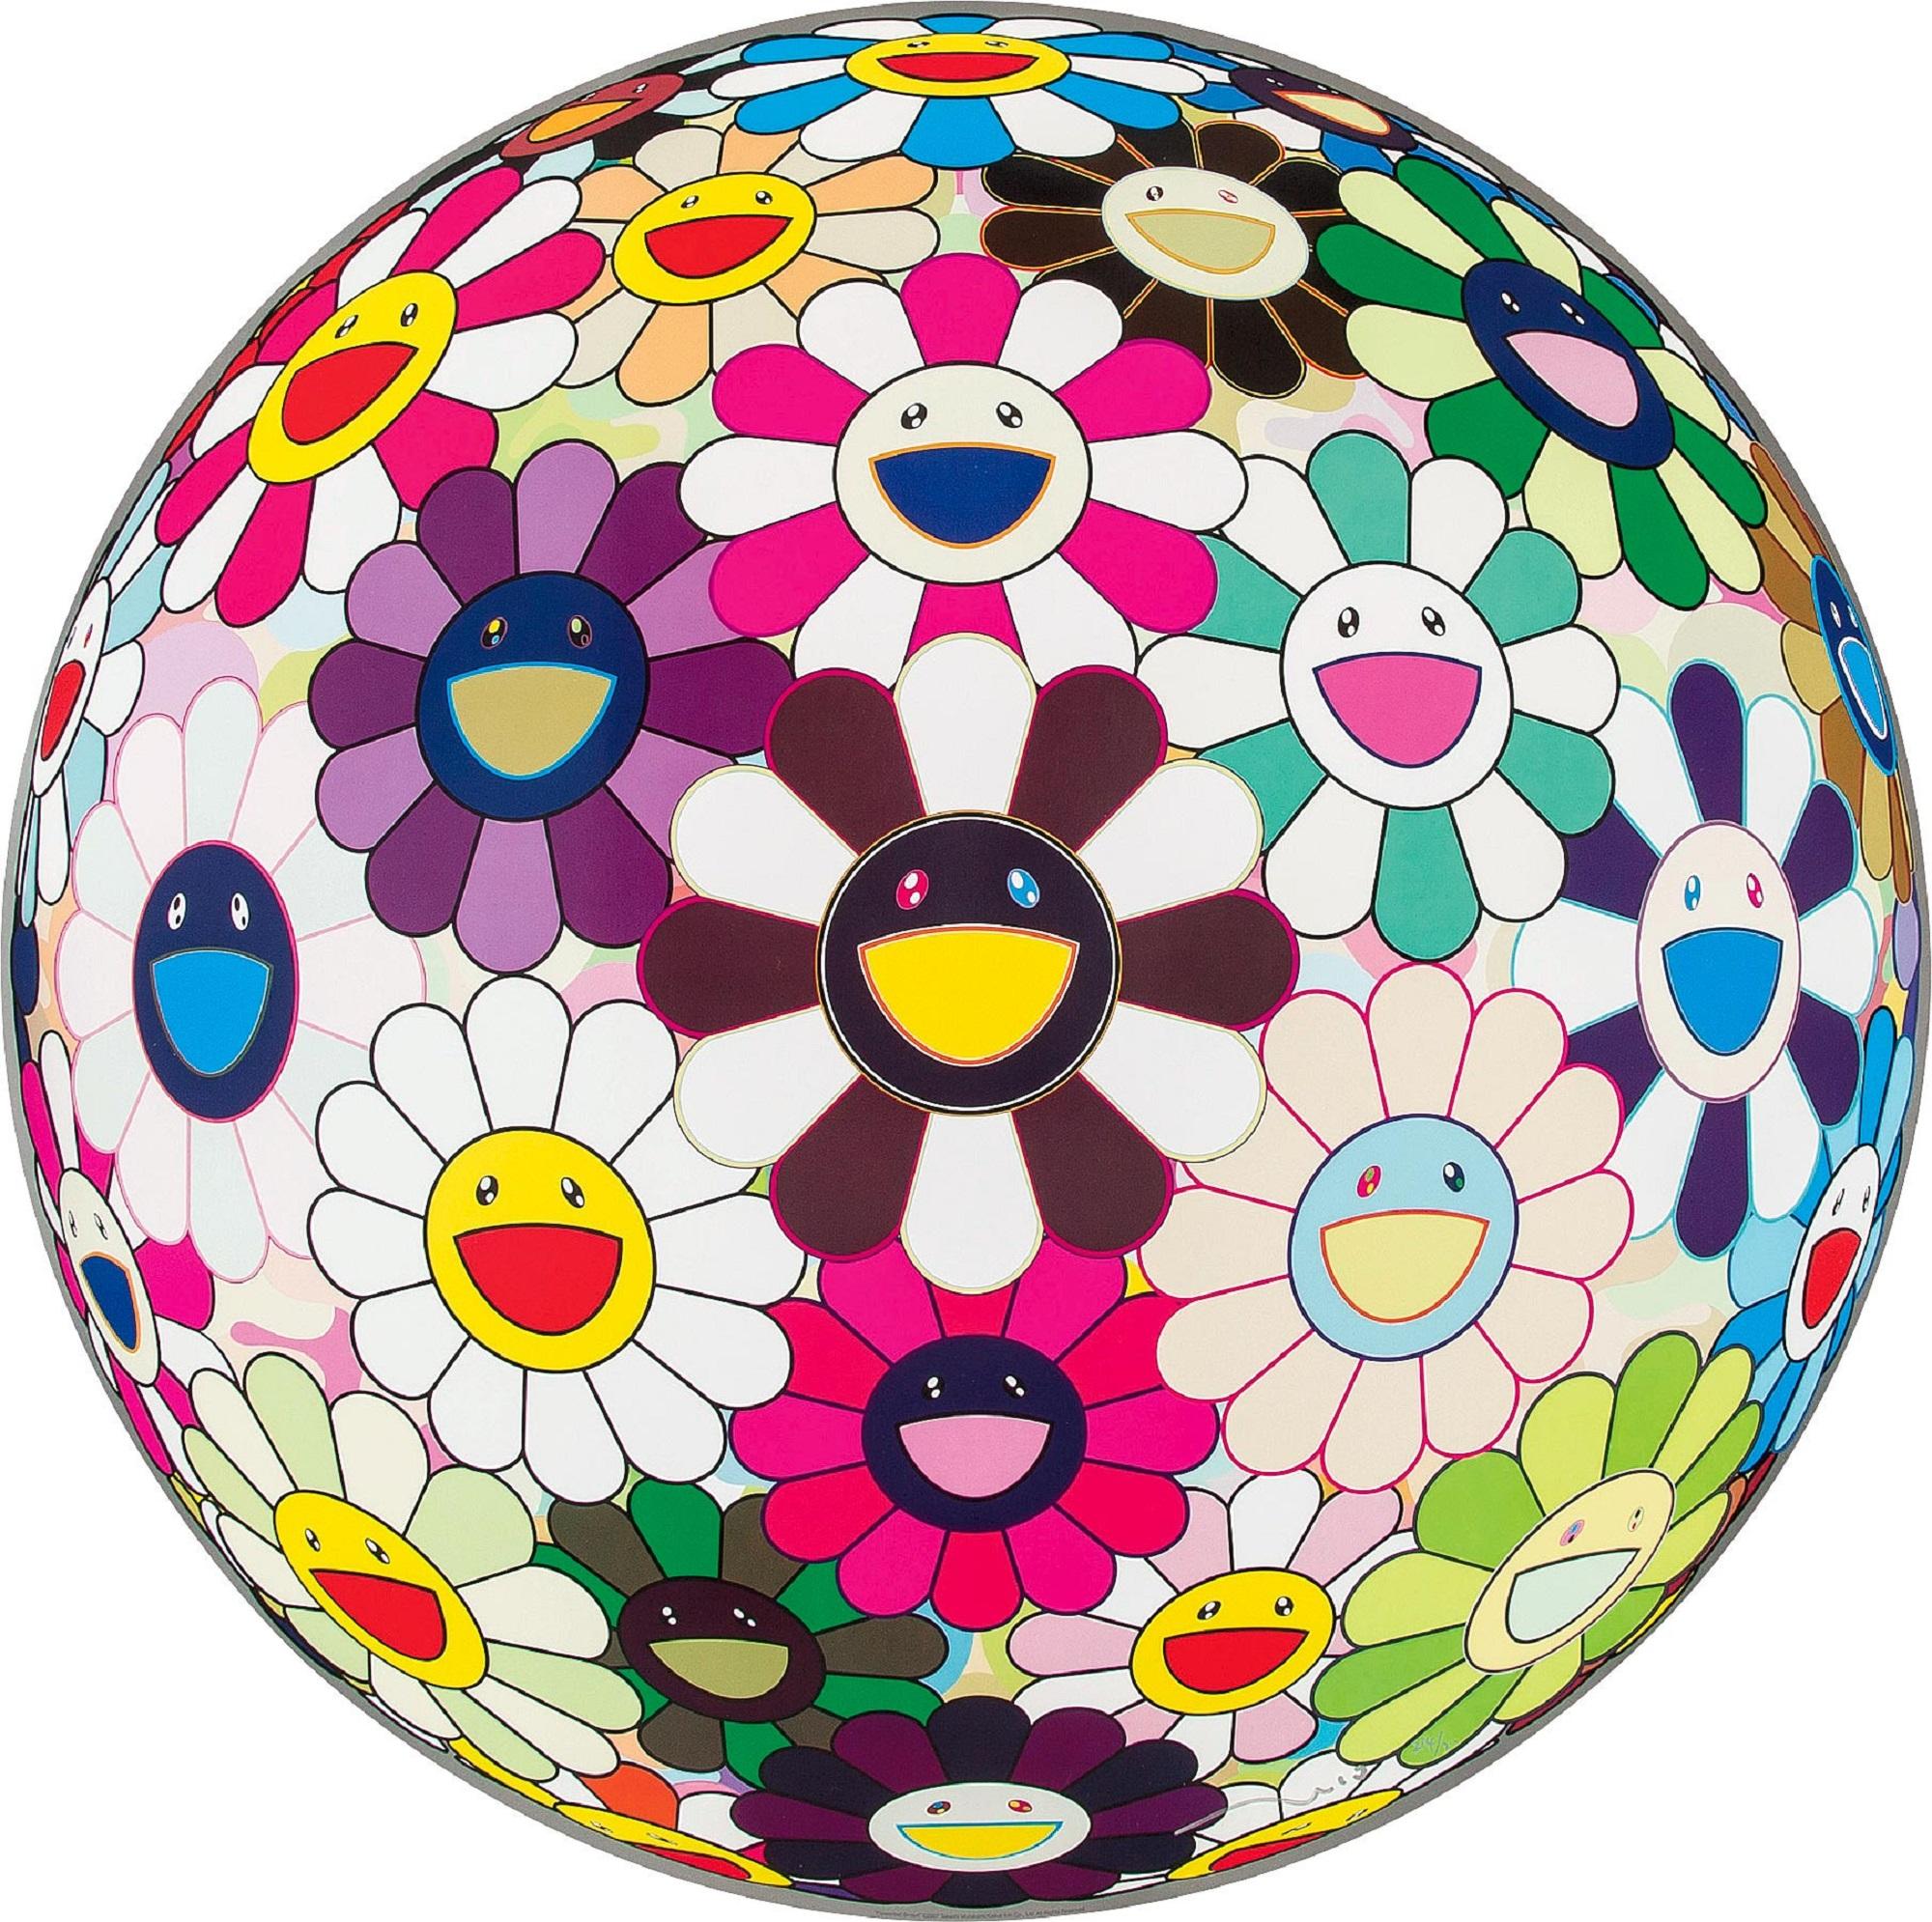 Takashi Murakami Figurative Print - Flowerball Brown. Limited Edition (print) by Murakami signed and numbered.